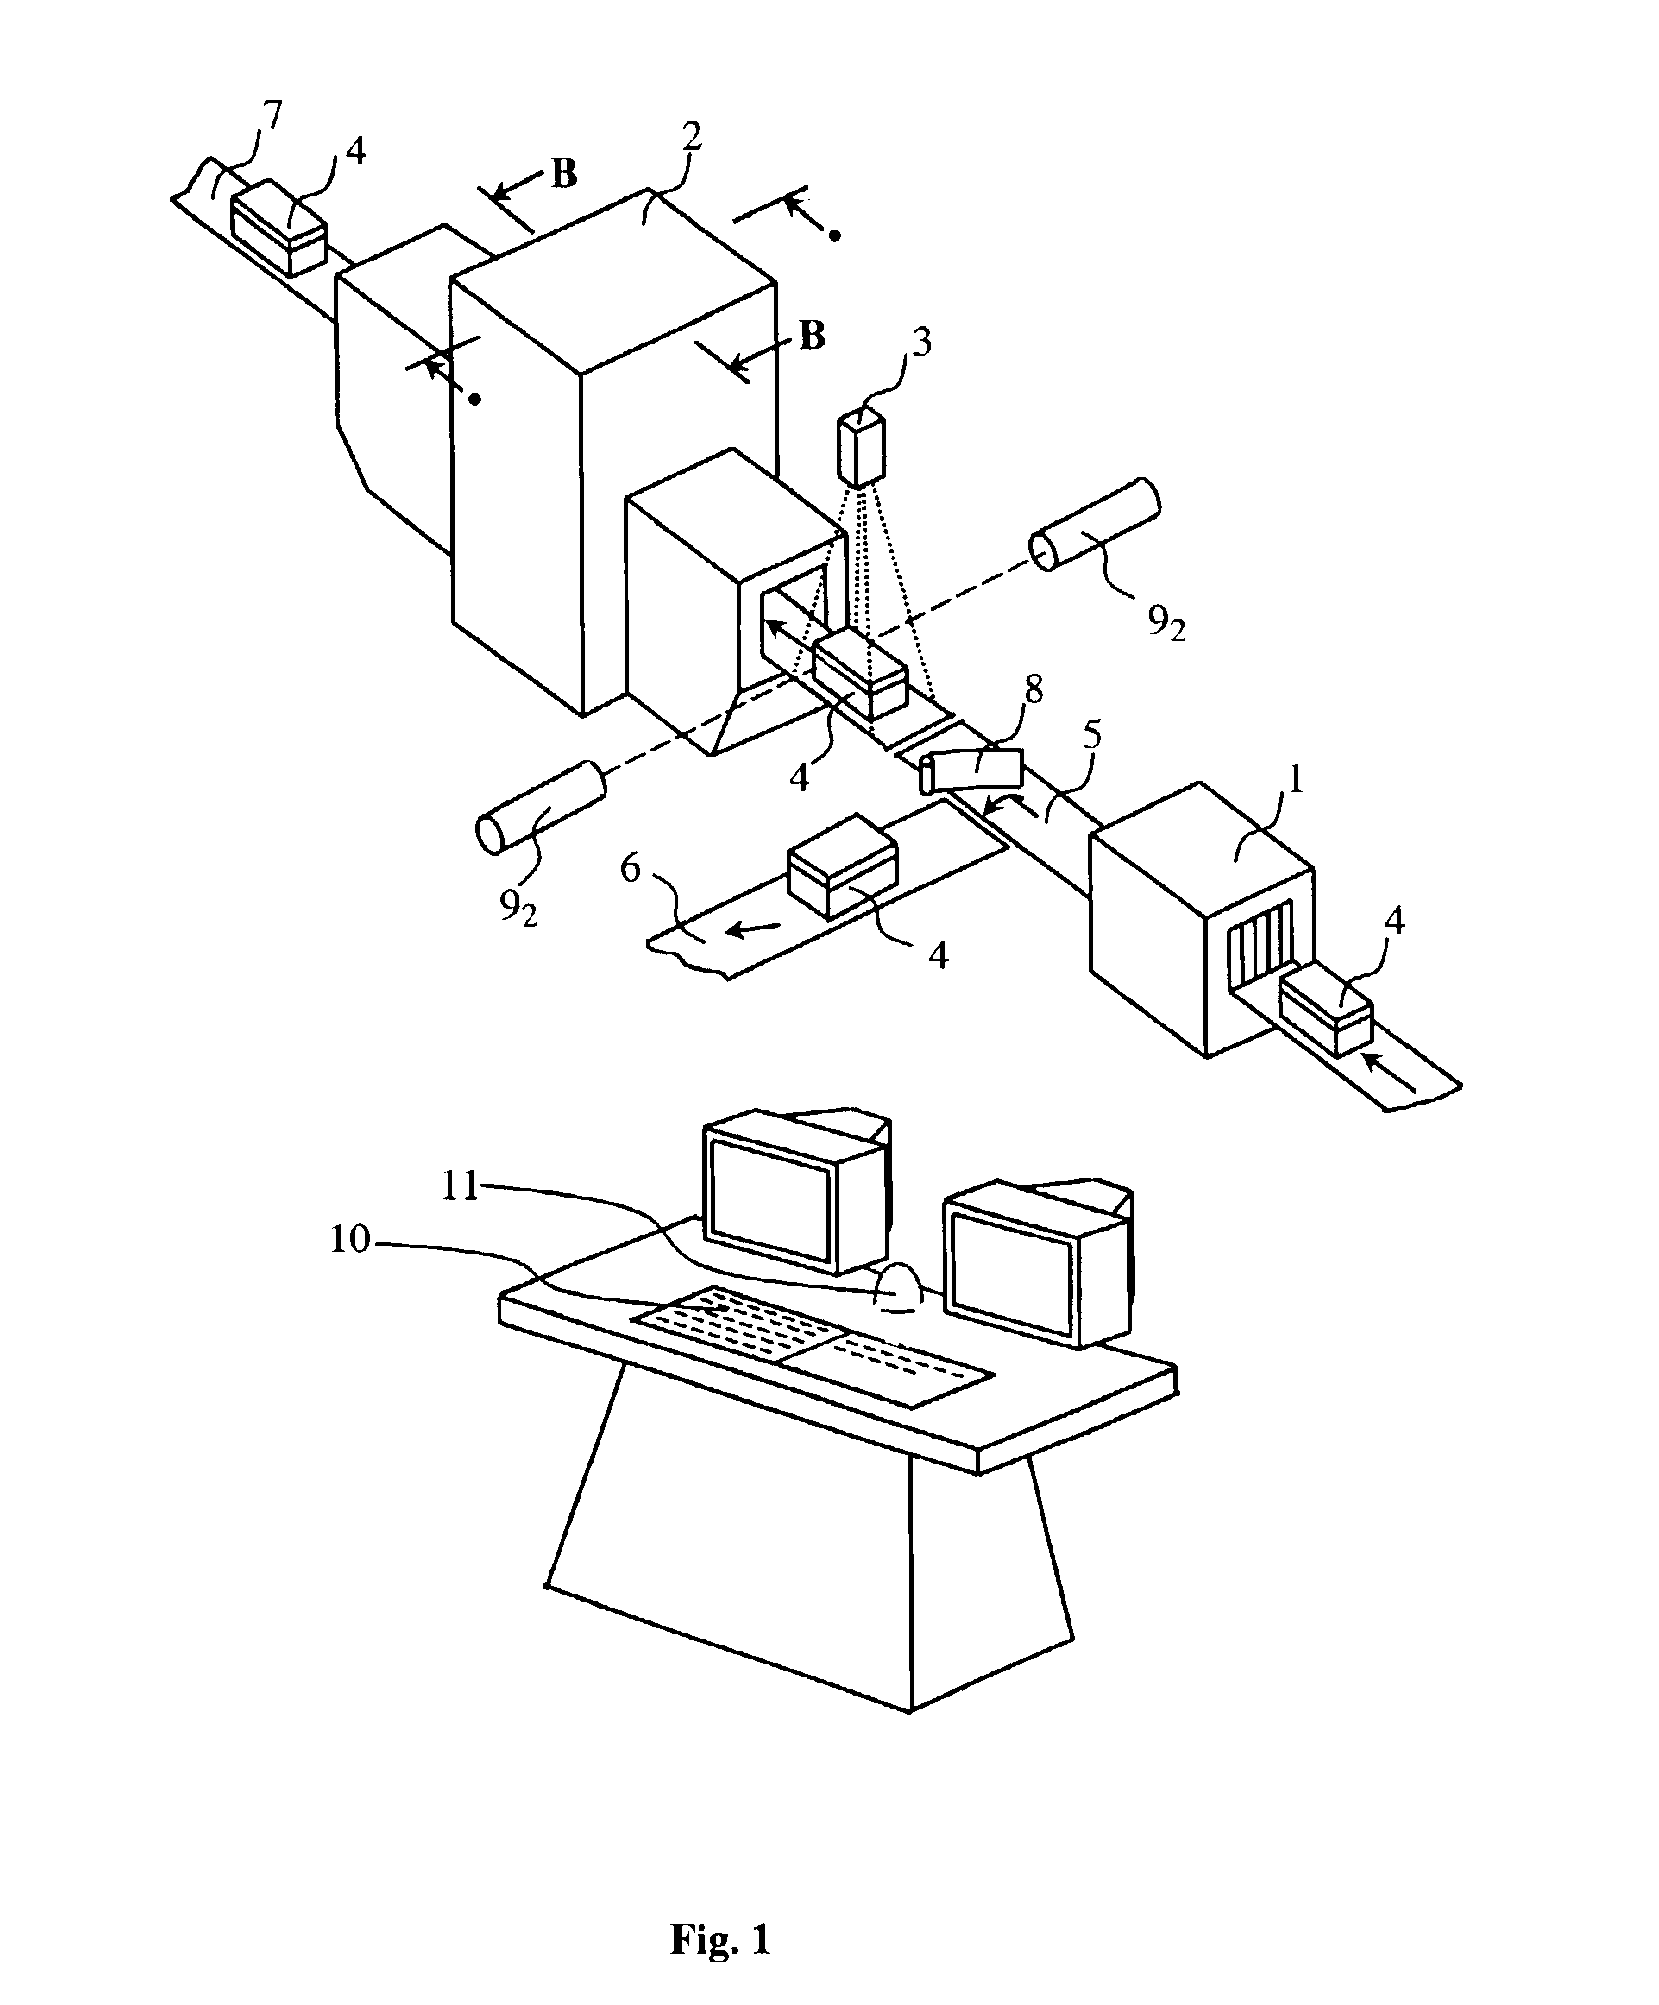 Method for detecting an explosive in an object under investigation